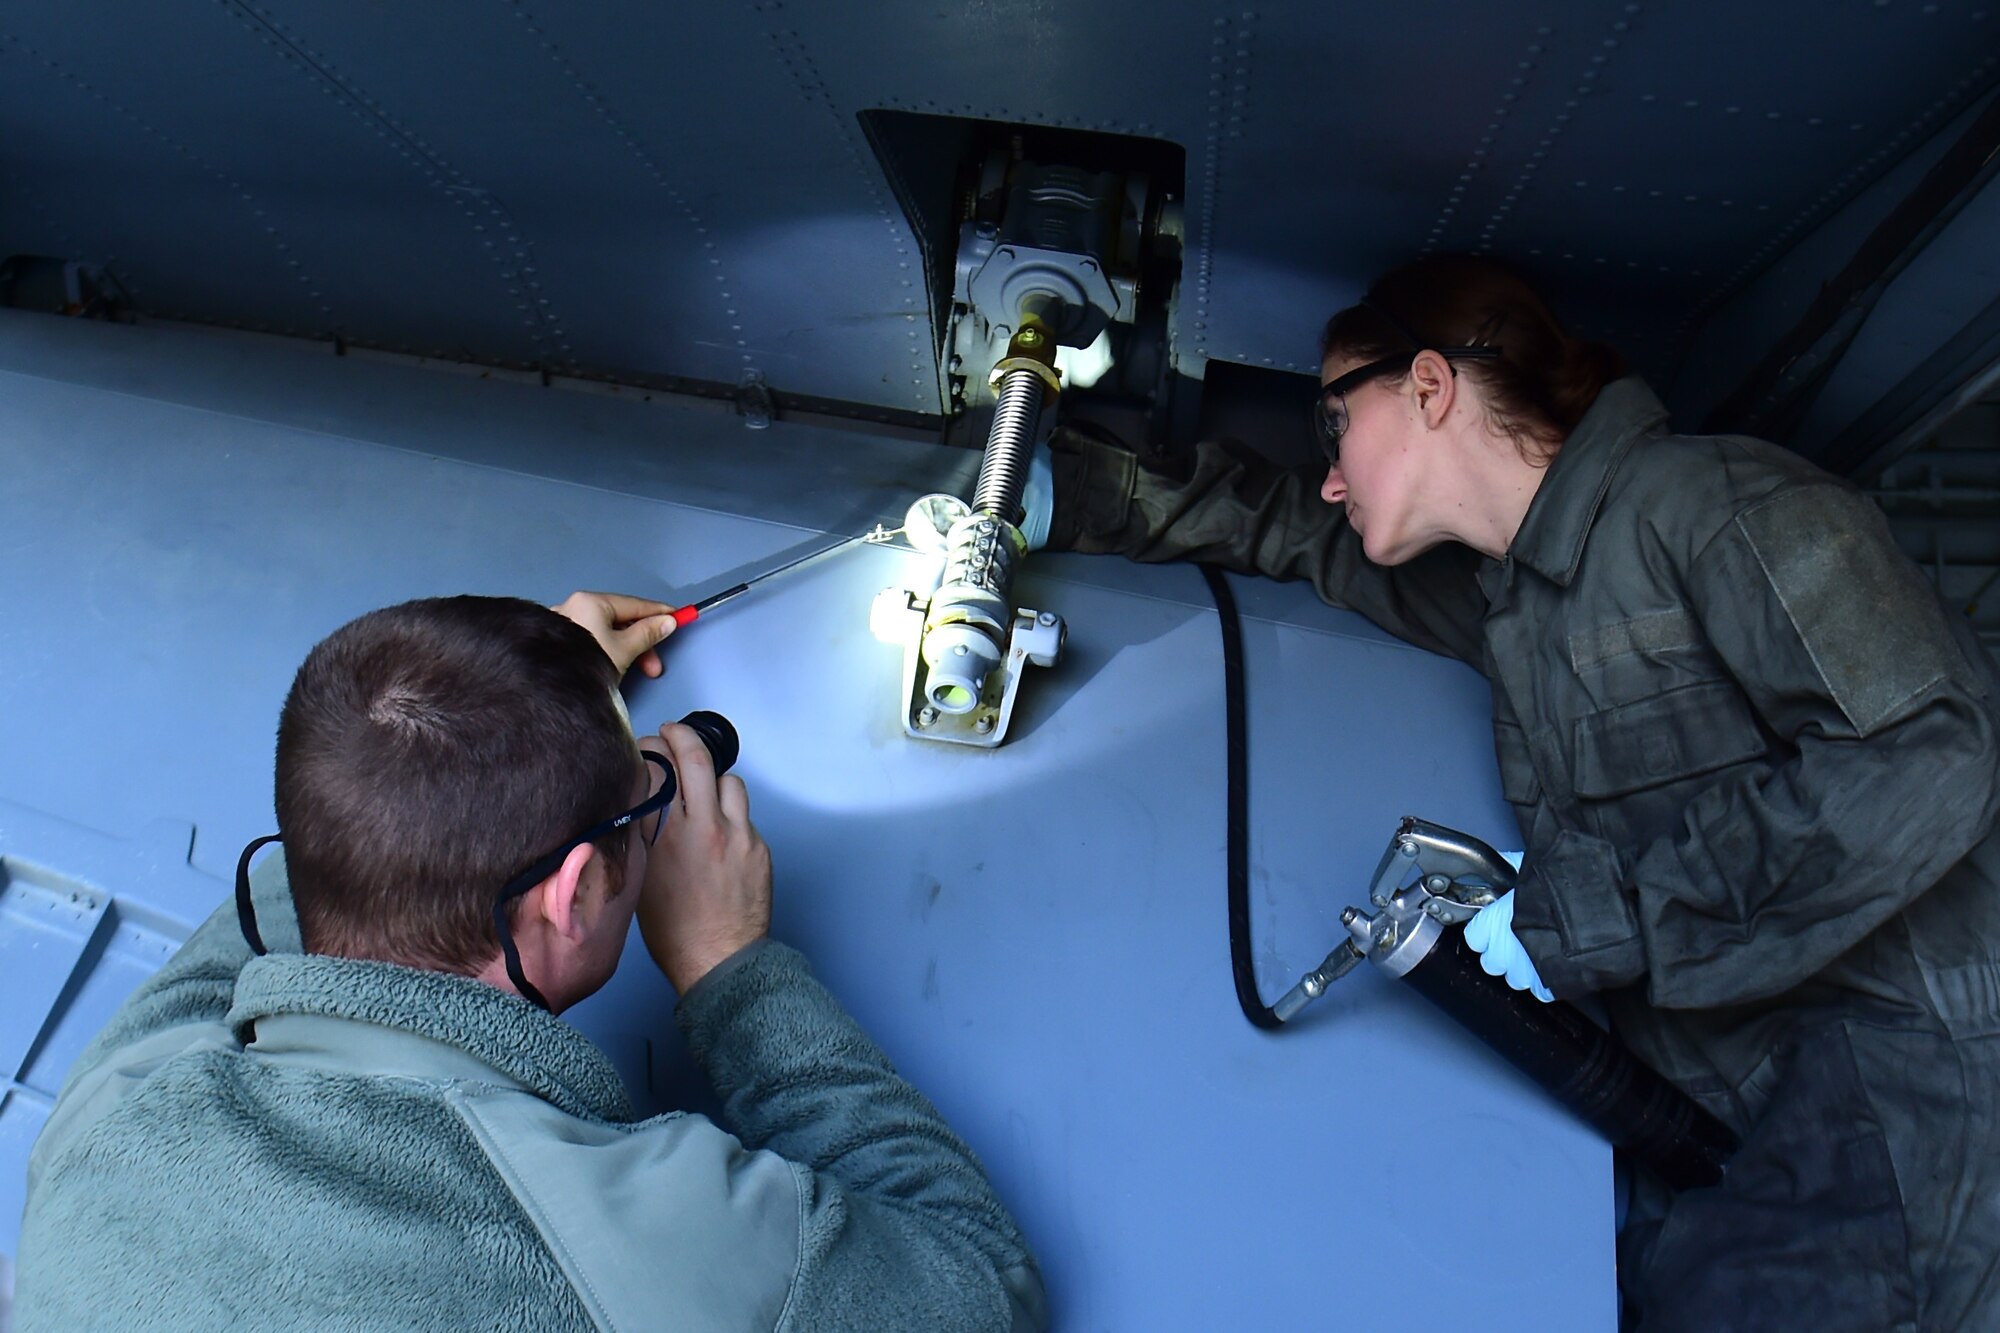 Tech. Sgt. Tanner Fye, 434th Maintenance Group quality assurance inspector, evaluates Staff Sgt. Stephanie Dimenco, 434th Maintenance Squadron isochronal crew chief, during her performance evaluation for critical lubrication items at Grissom Air Reserve Base, Indiana, Nov. 3, 2019.   For the first time since the base’s realignment as a Reserve base in 1994, the 434th Maintenance Group has converted seven air reserve technician positions to straight civilian positions.  (U.S. Air Force photo by Staff Sgt. Chris Massey)